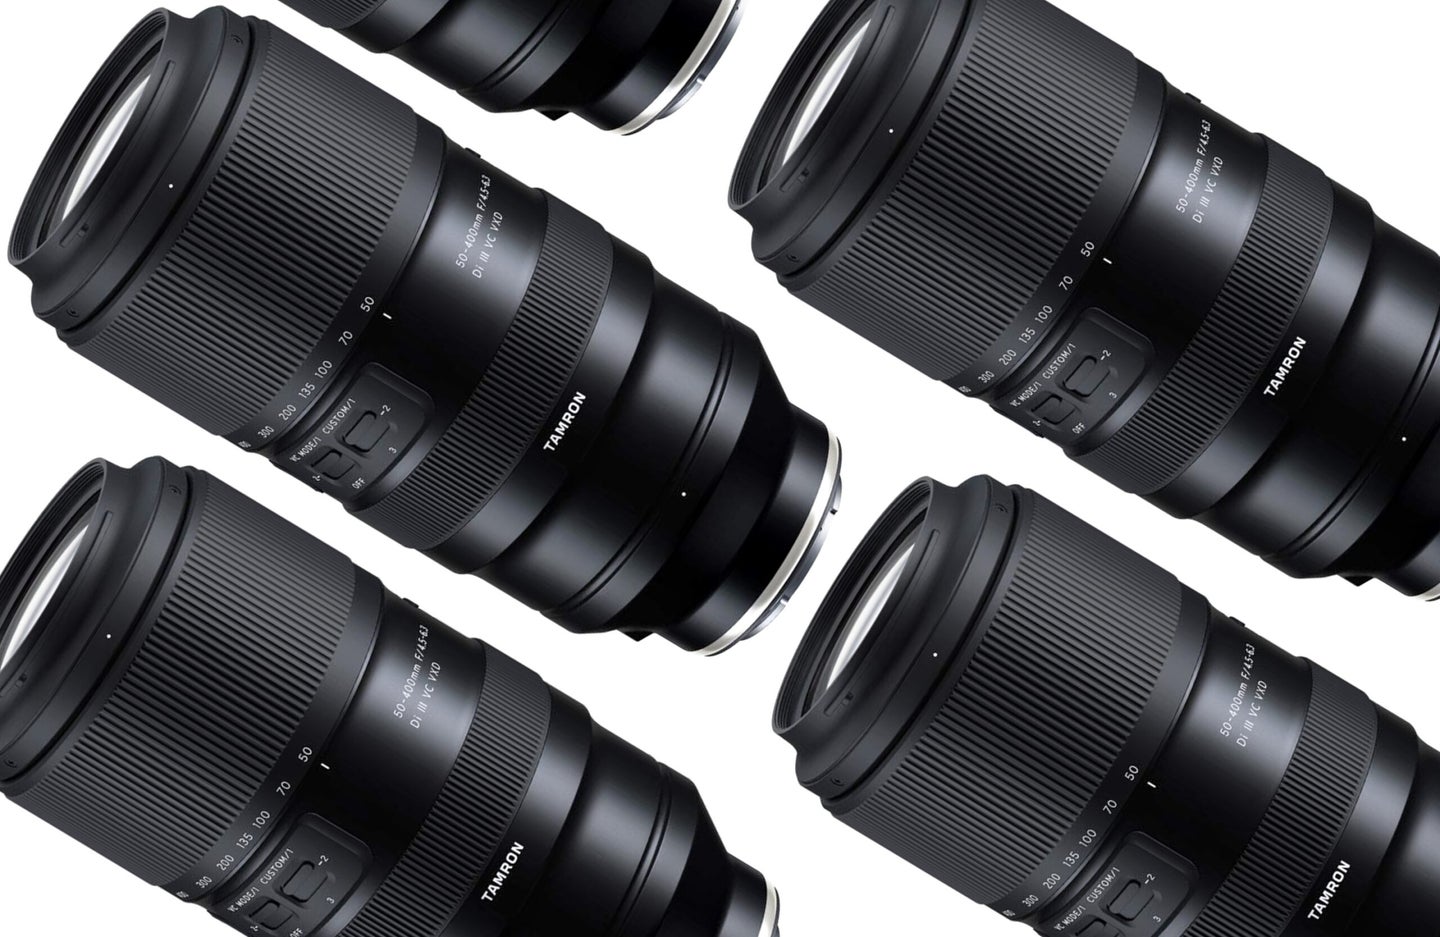 Tamron's new 50-400mm